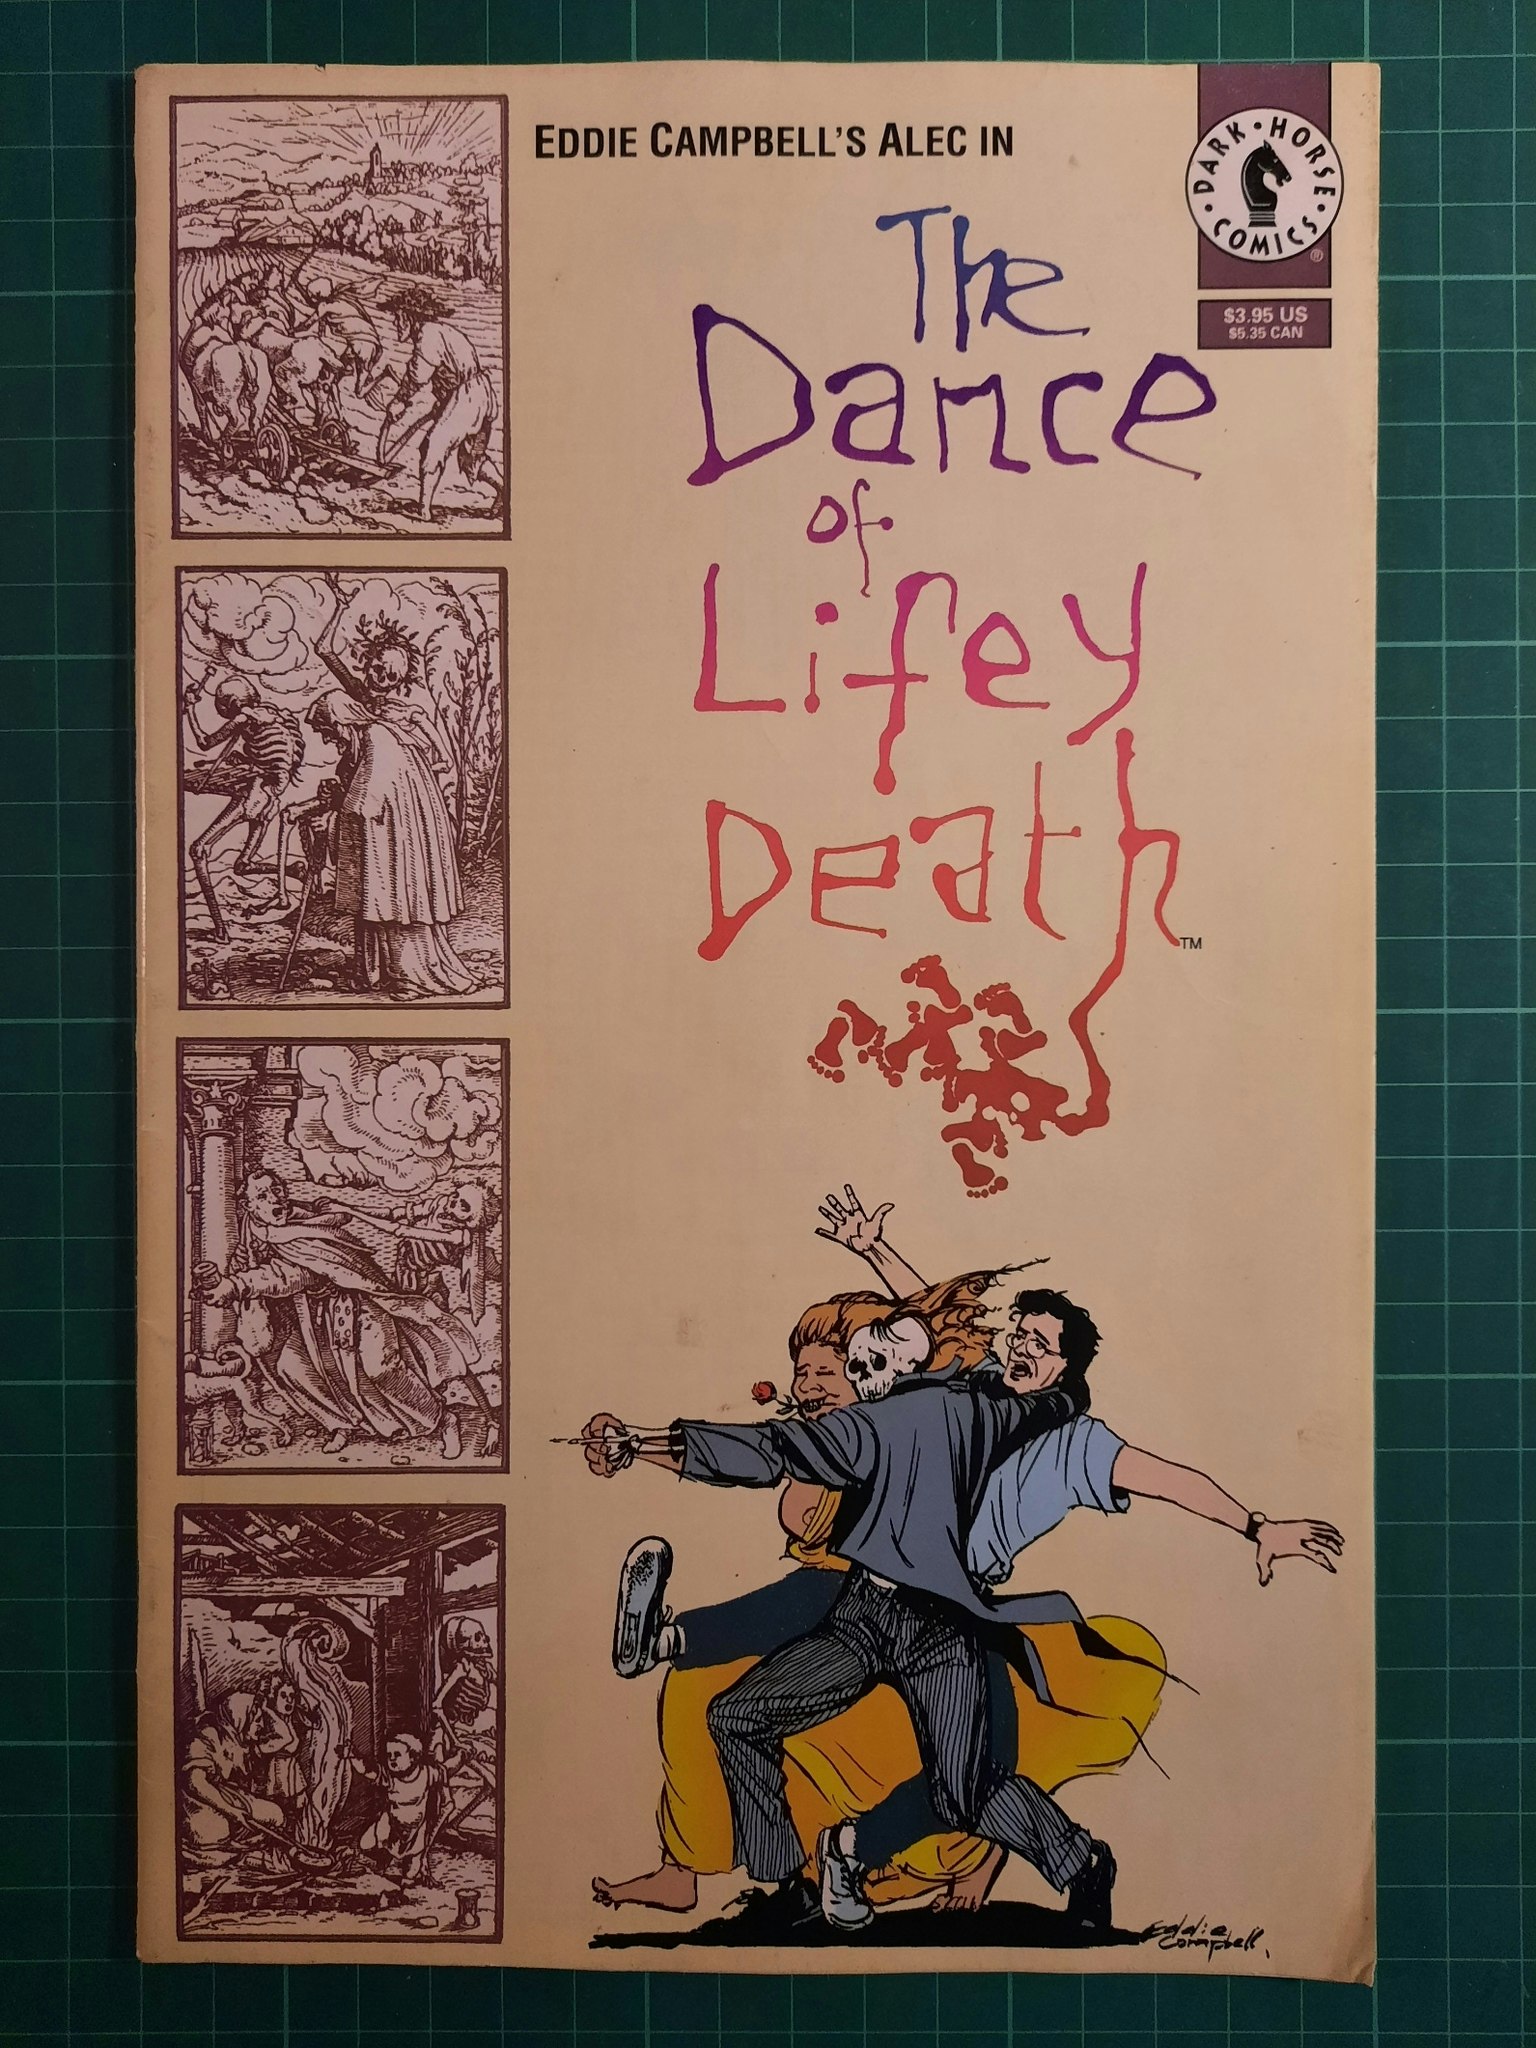 The dance of lifey death